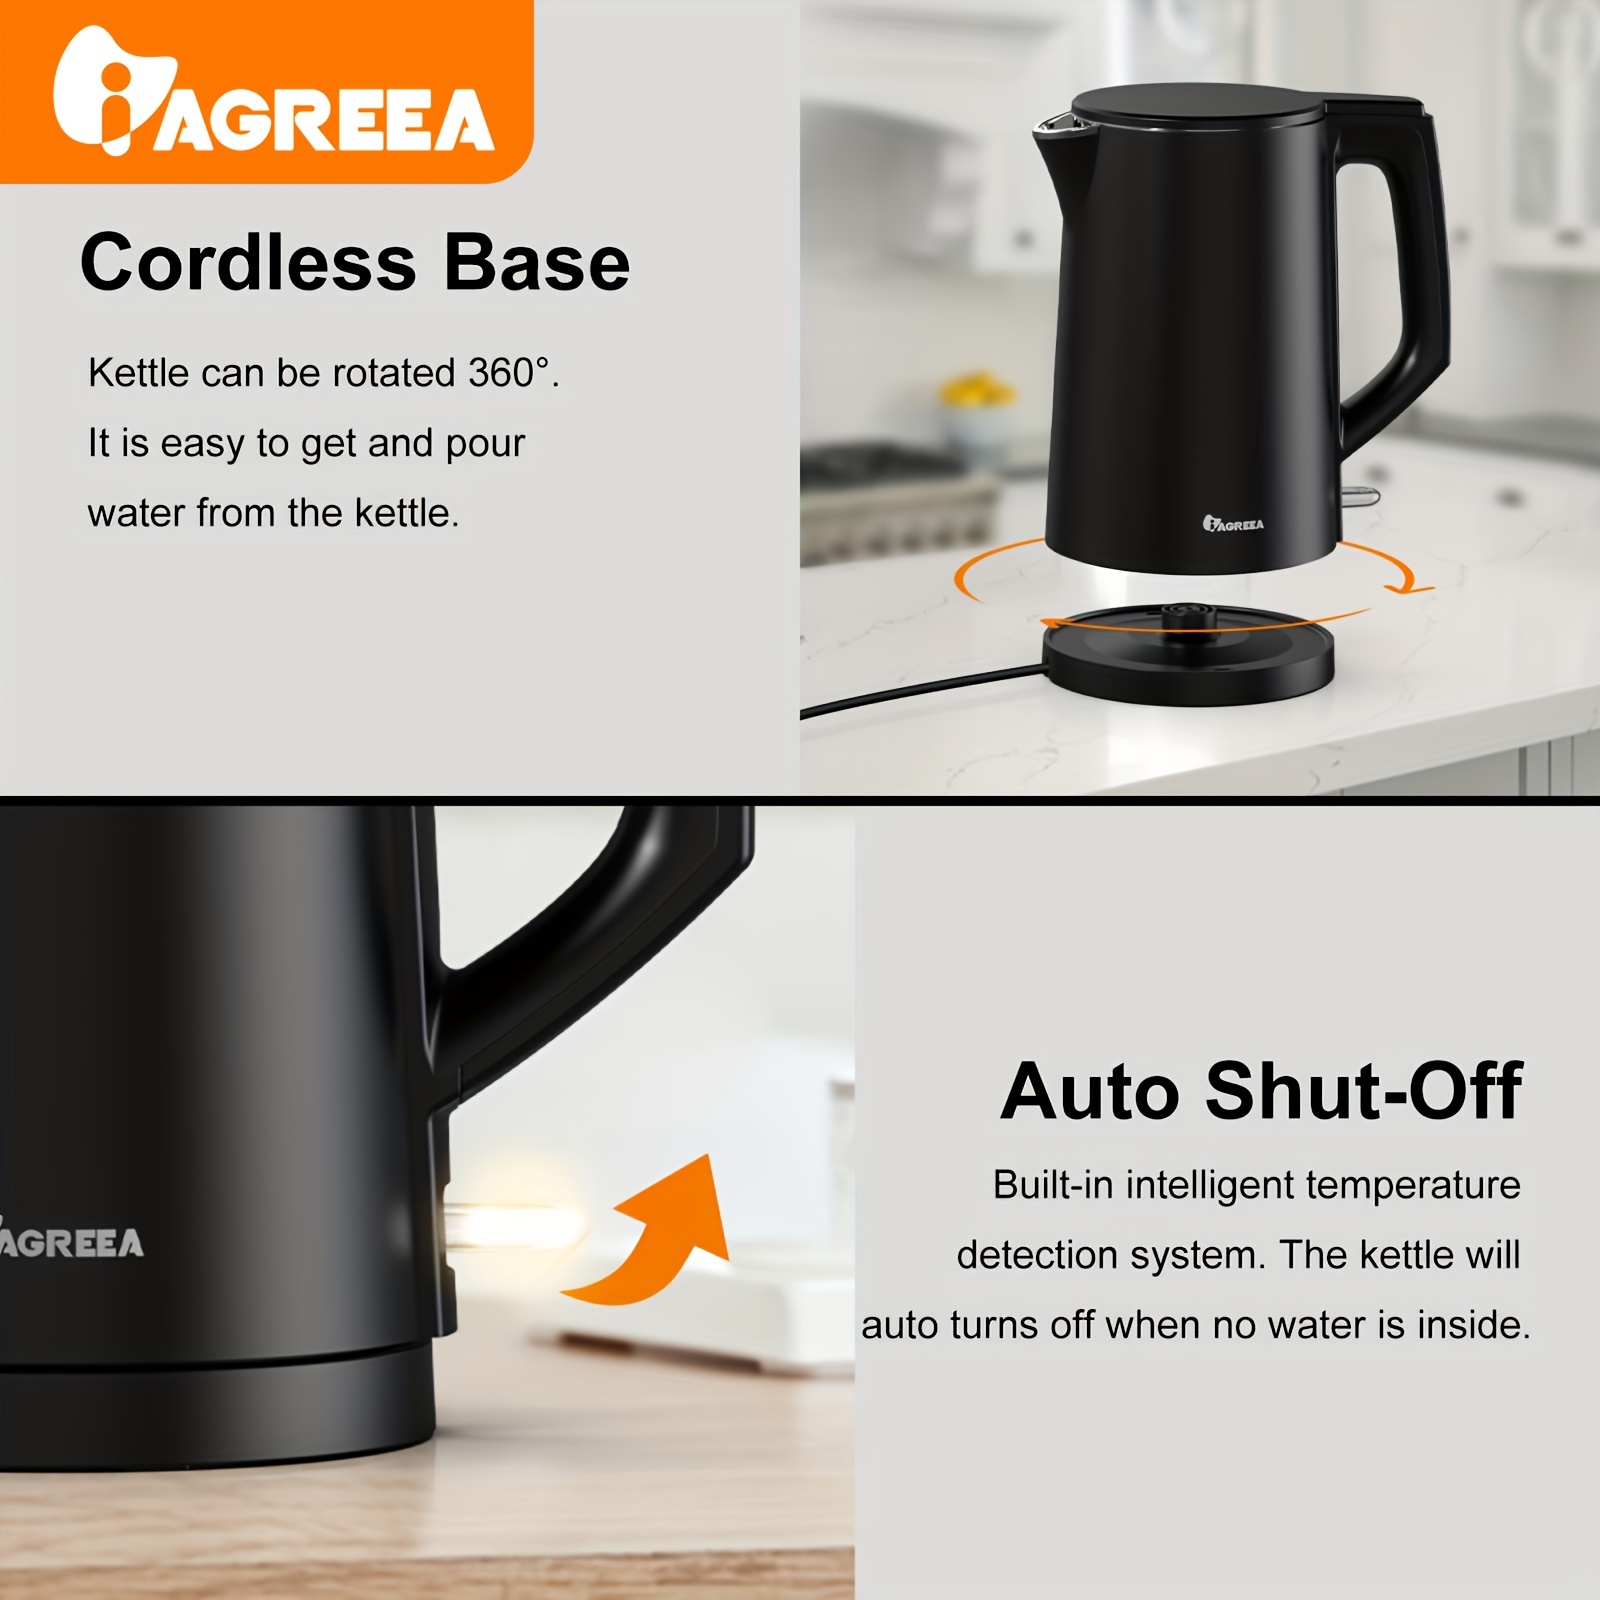 Steel Electric Tea Kettle with Auto Shut-Off and Boil Dry